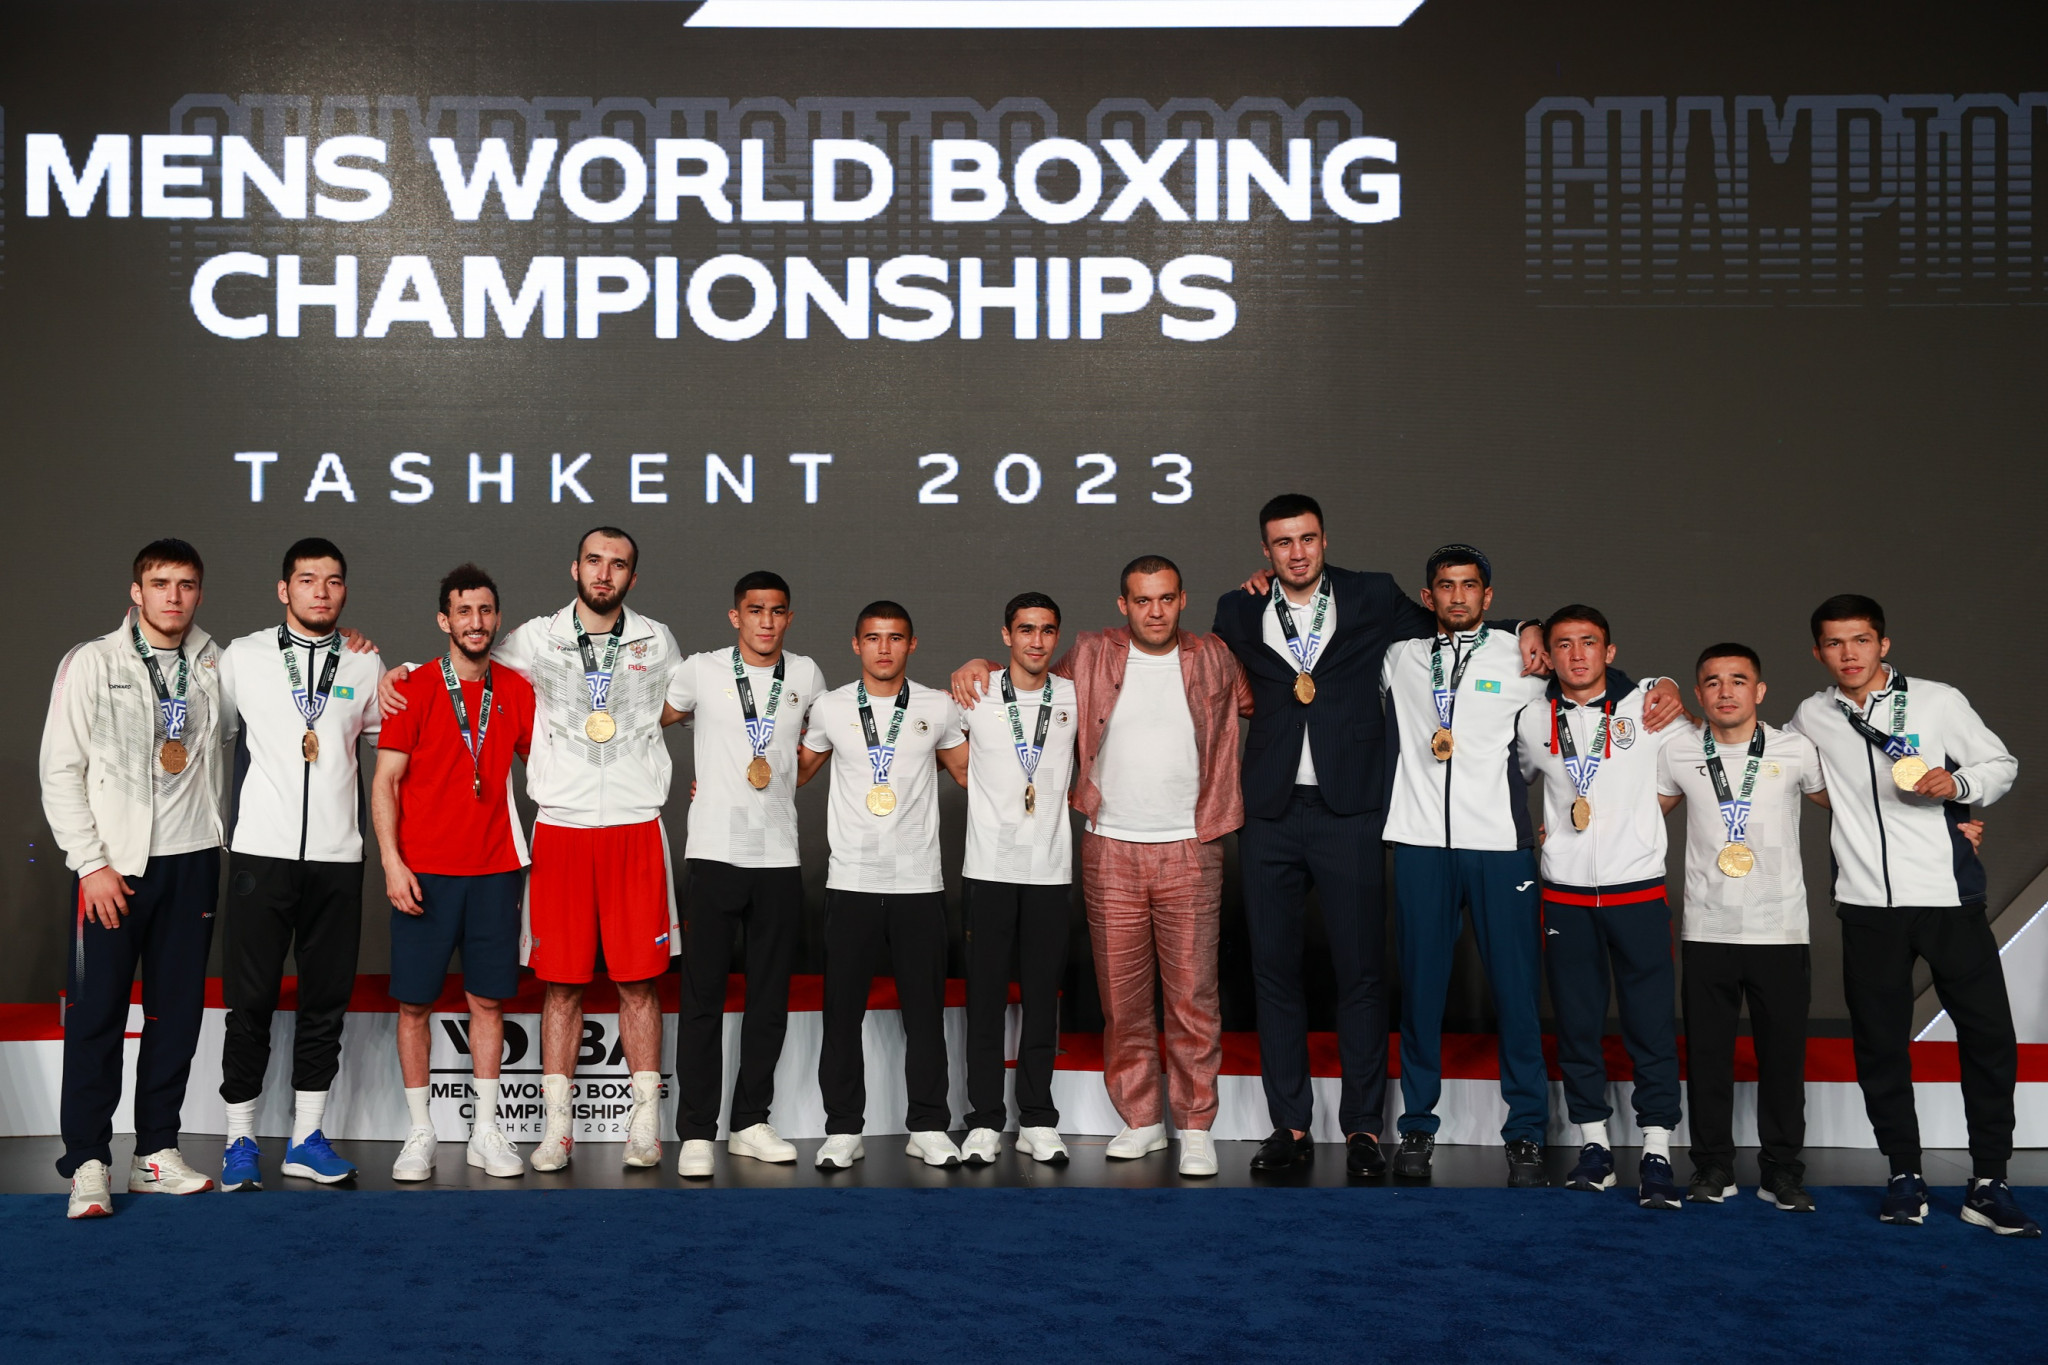 Umar Kremlev is attempting to keep the IBA united amid the threat of World Boxing ©IBA